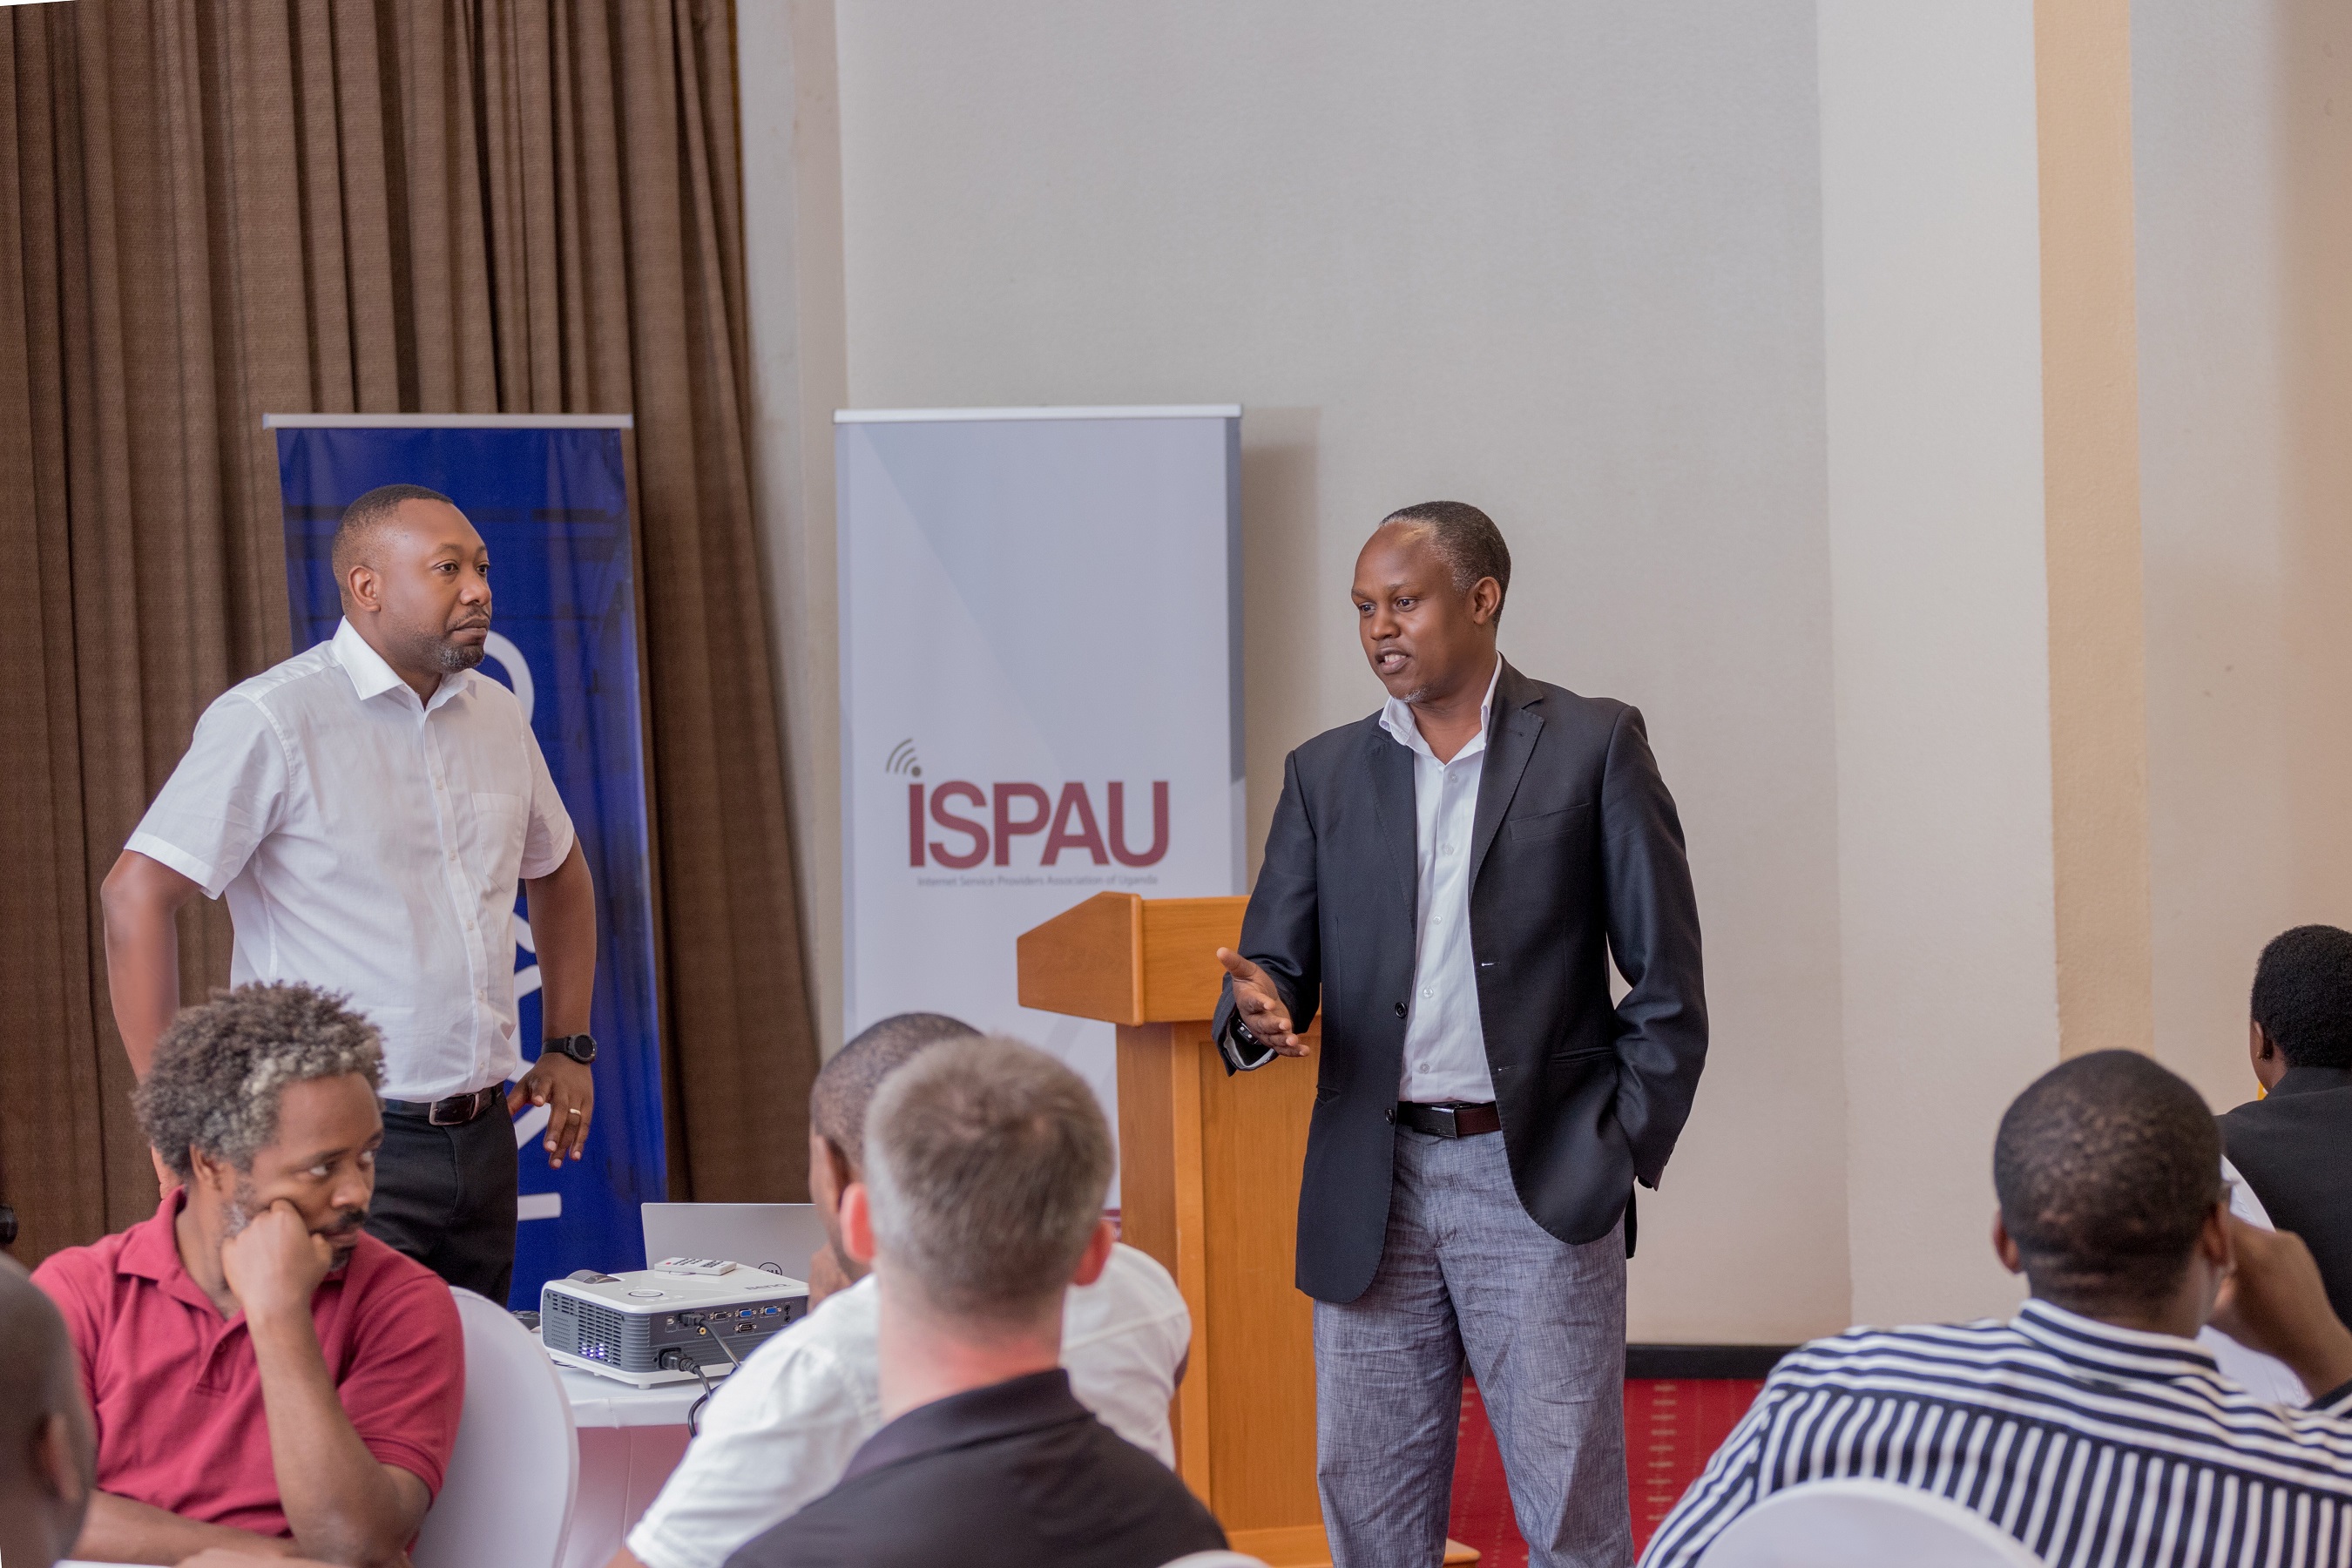 ISPAU Chairman; Godfrey Sserwamukoko (R), addressing ISPAU and the press on the need for synerges between Carrier Neutral Data Centres and ISPs/Telco's while Raxio General Manager; James Byaruhanga (L) looks on.